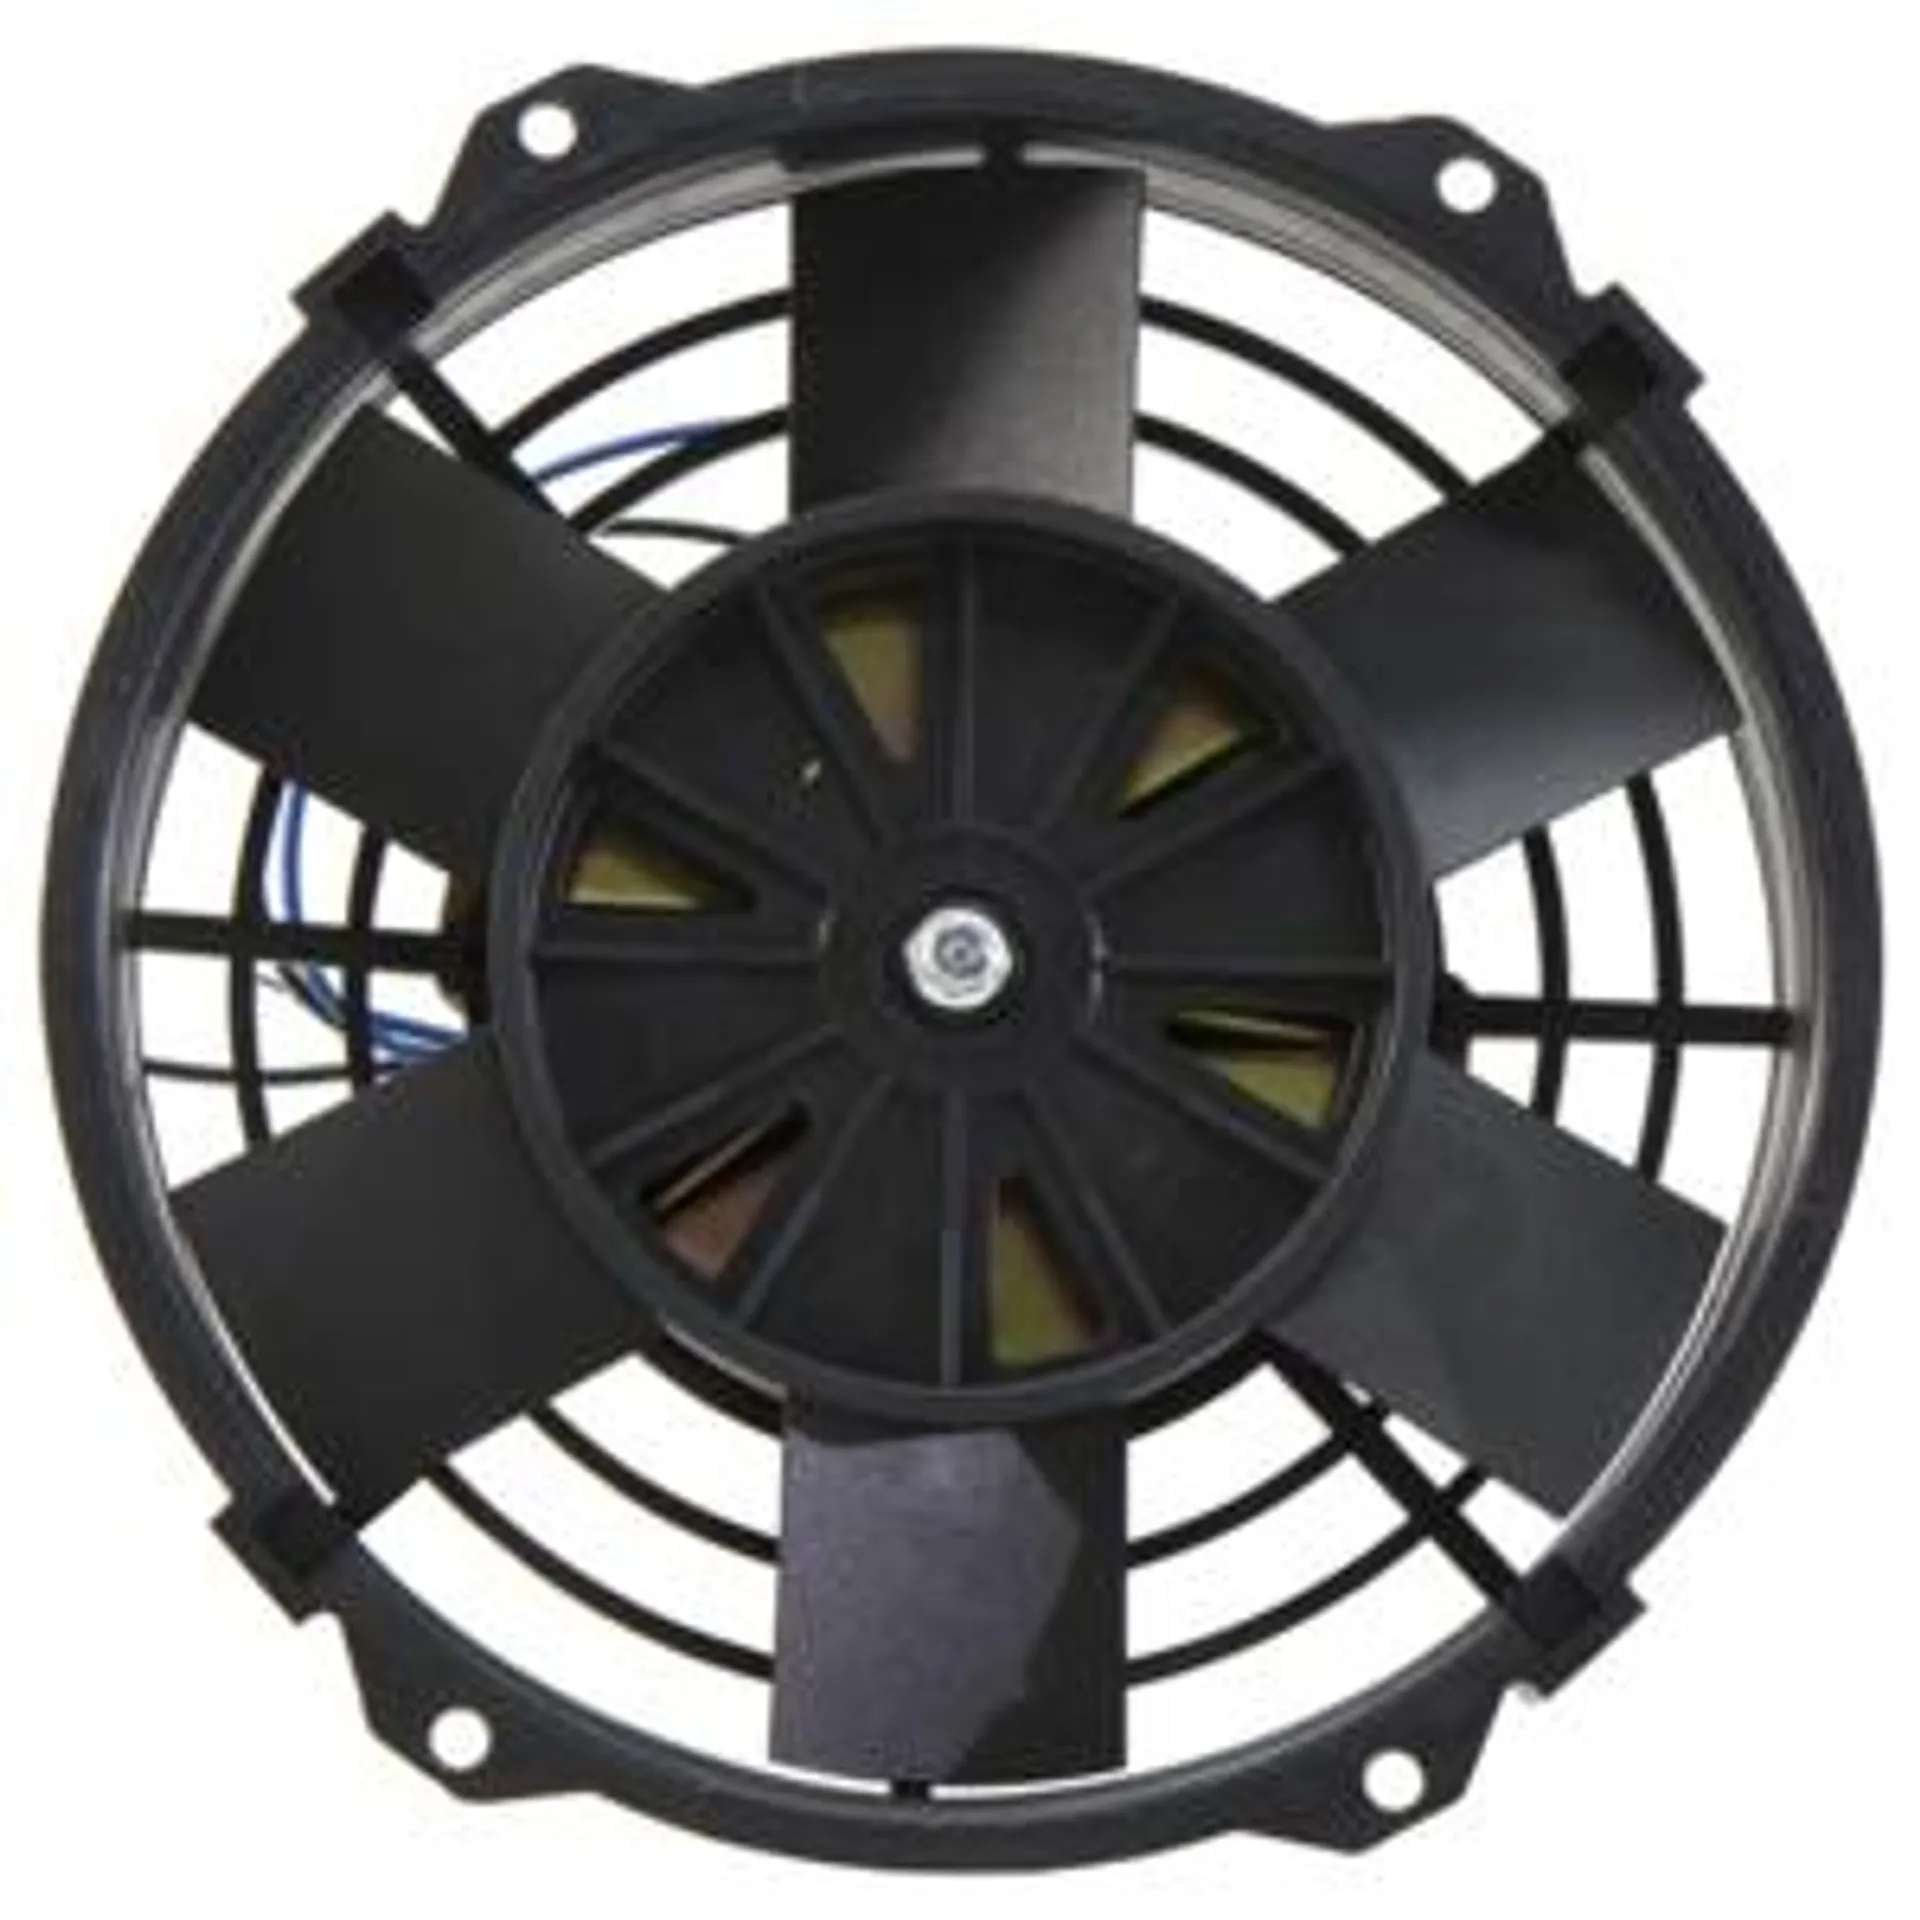 Performance Plus 12V 203mm 8"" Thermo Fan Kit - PPTF8